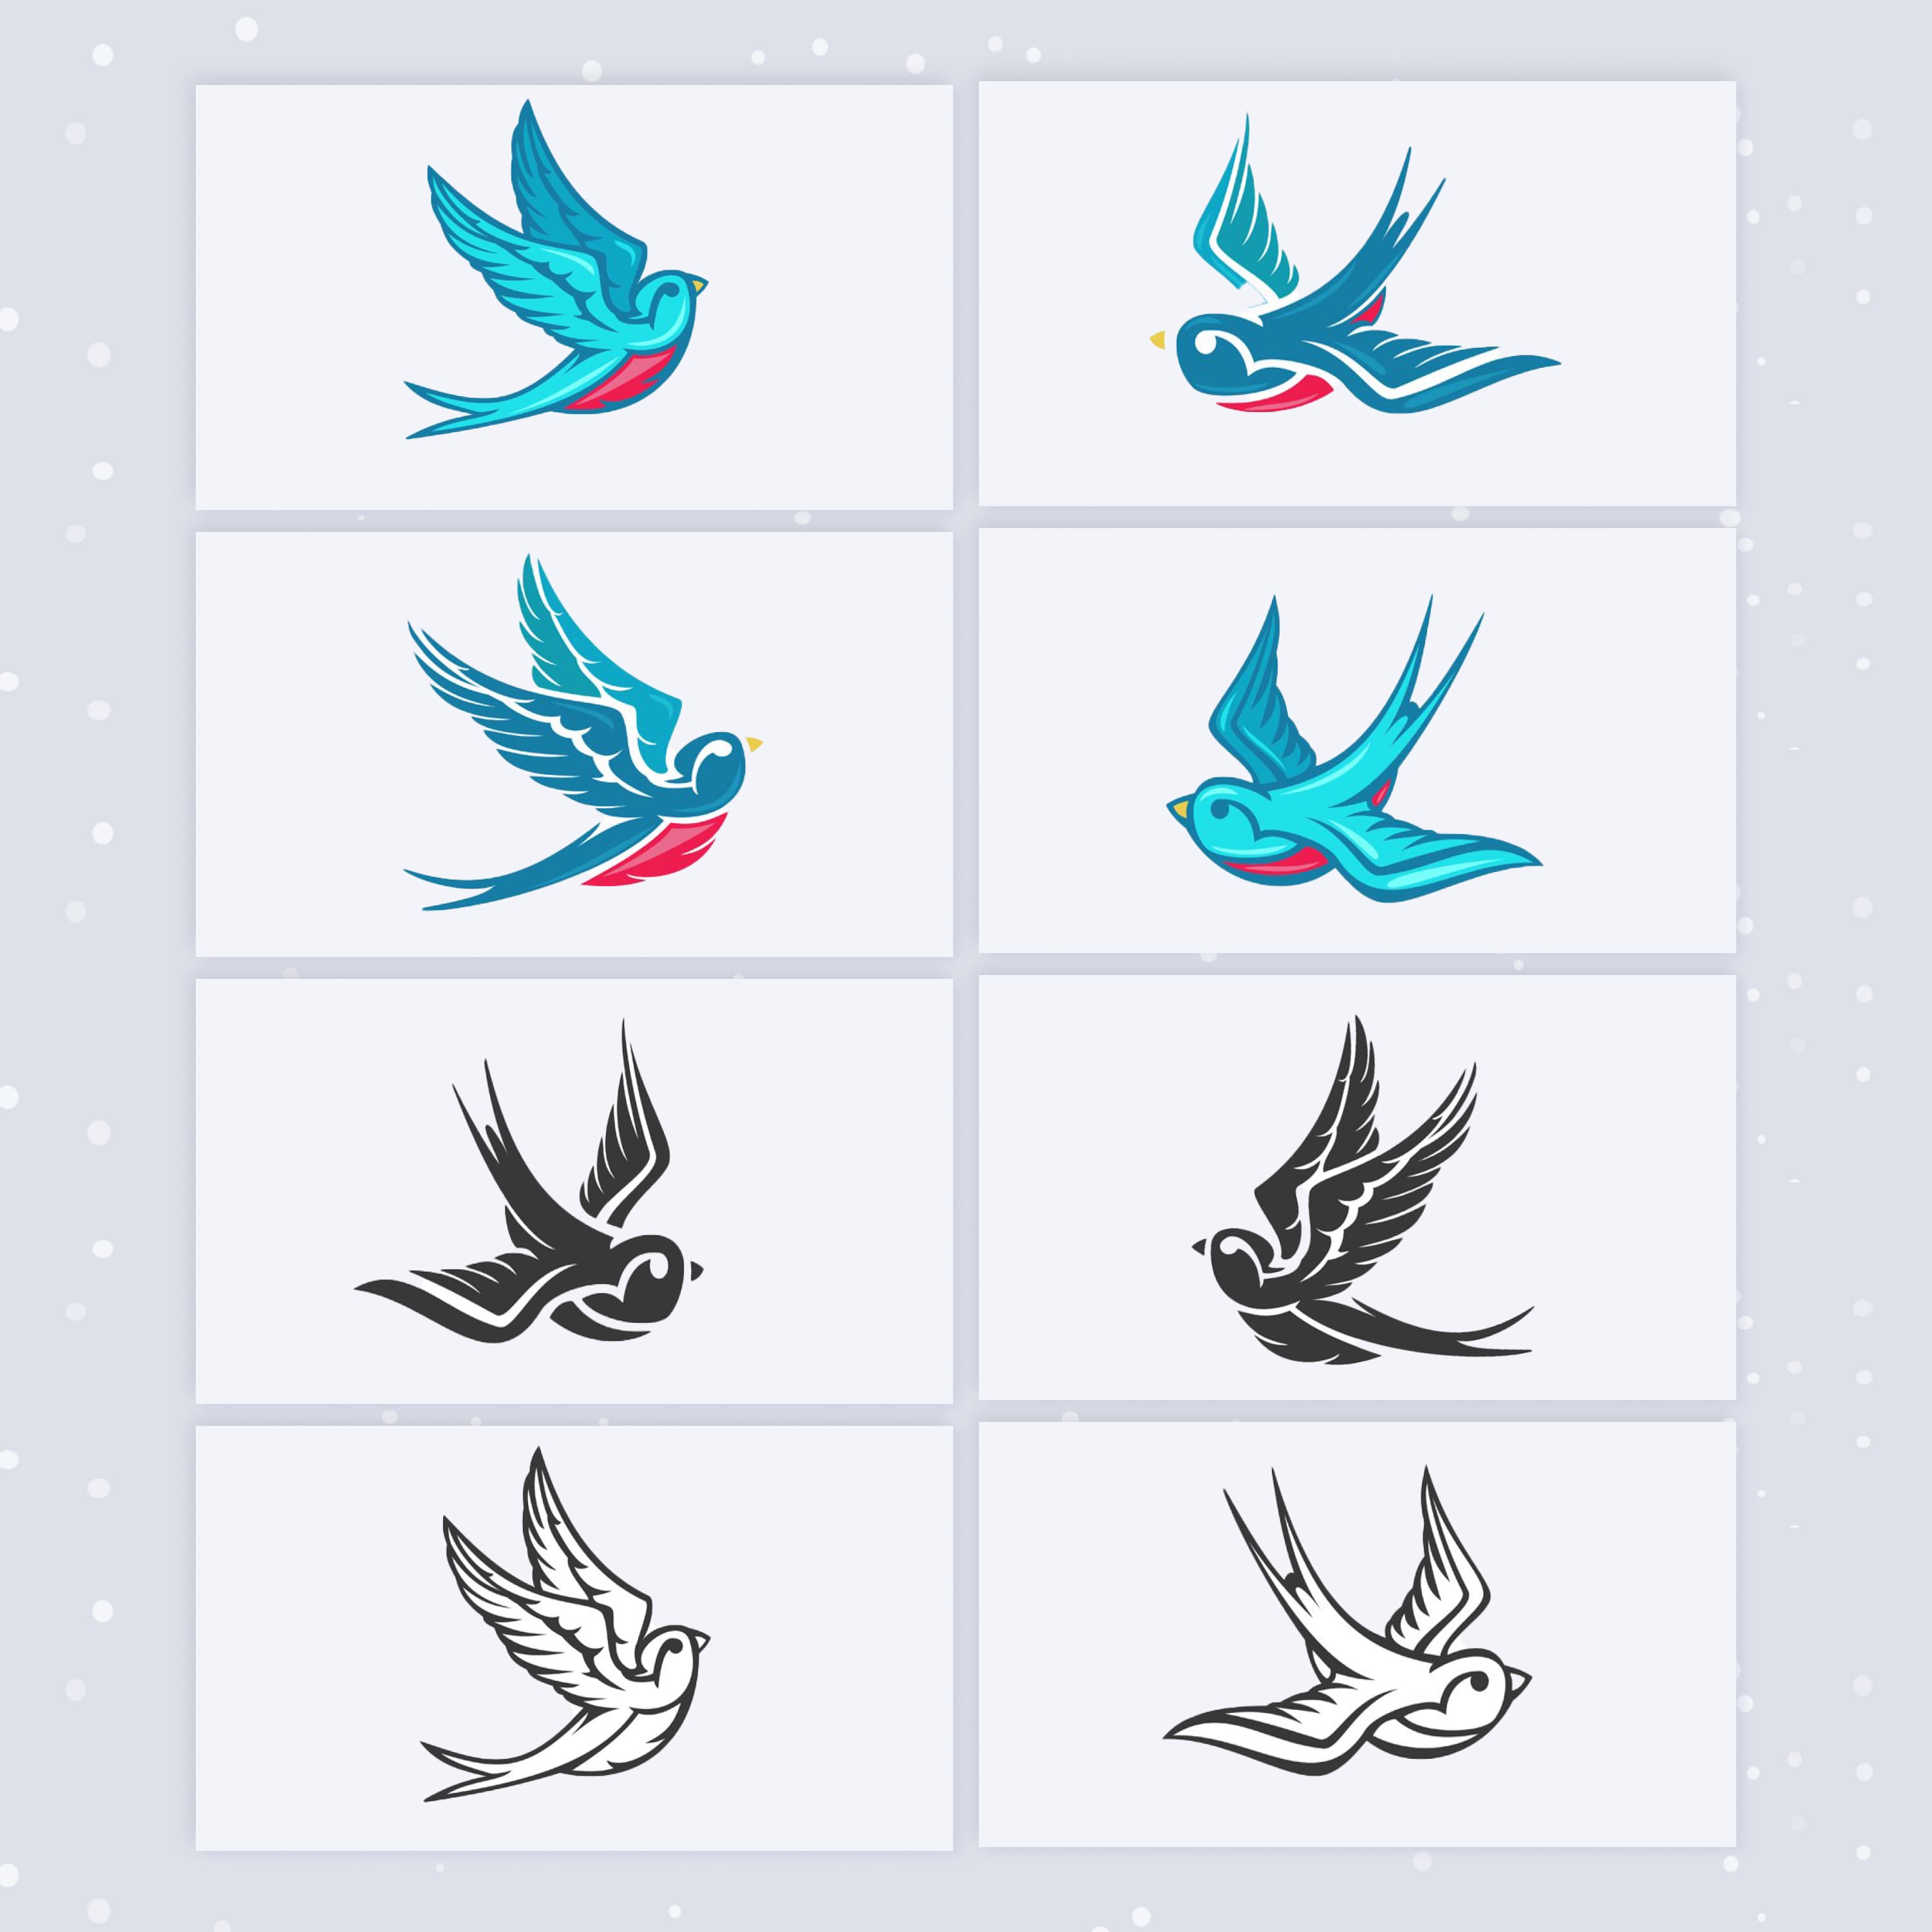 Colored versions of swallows elements.